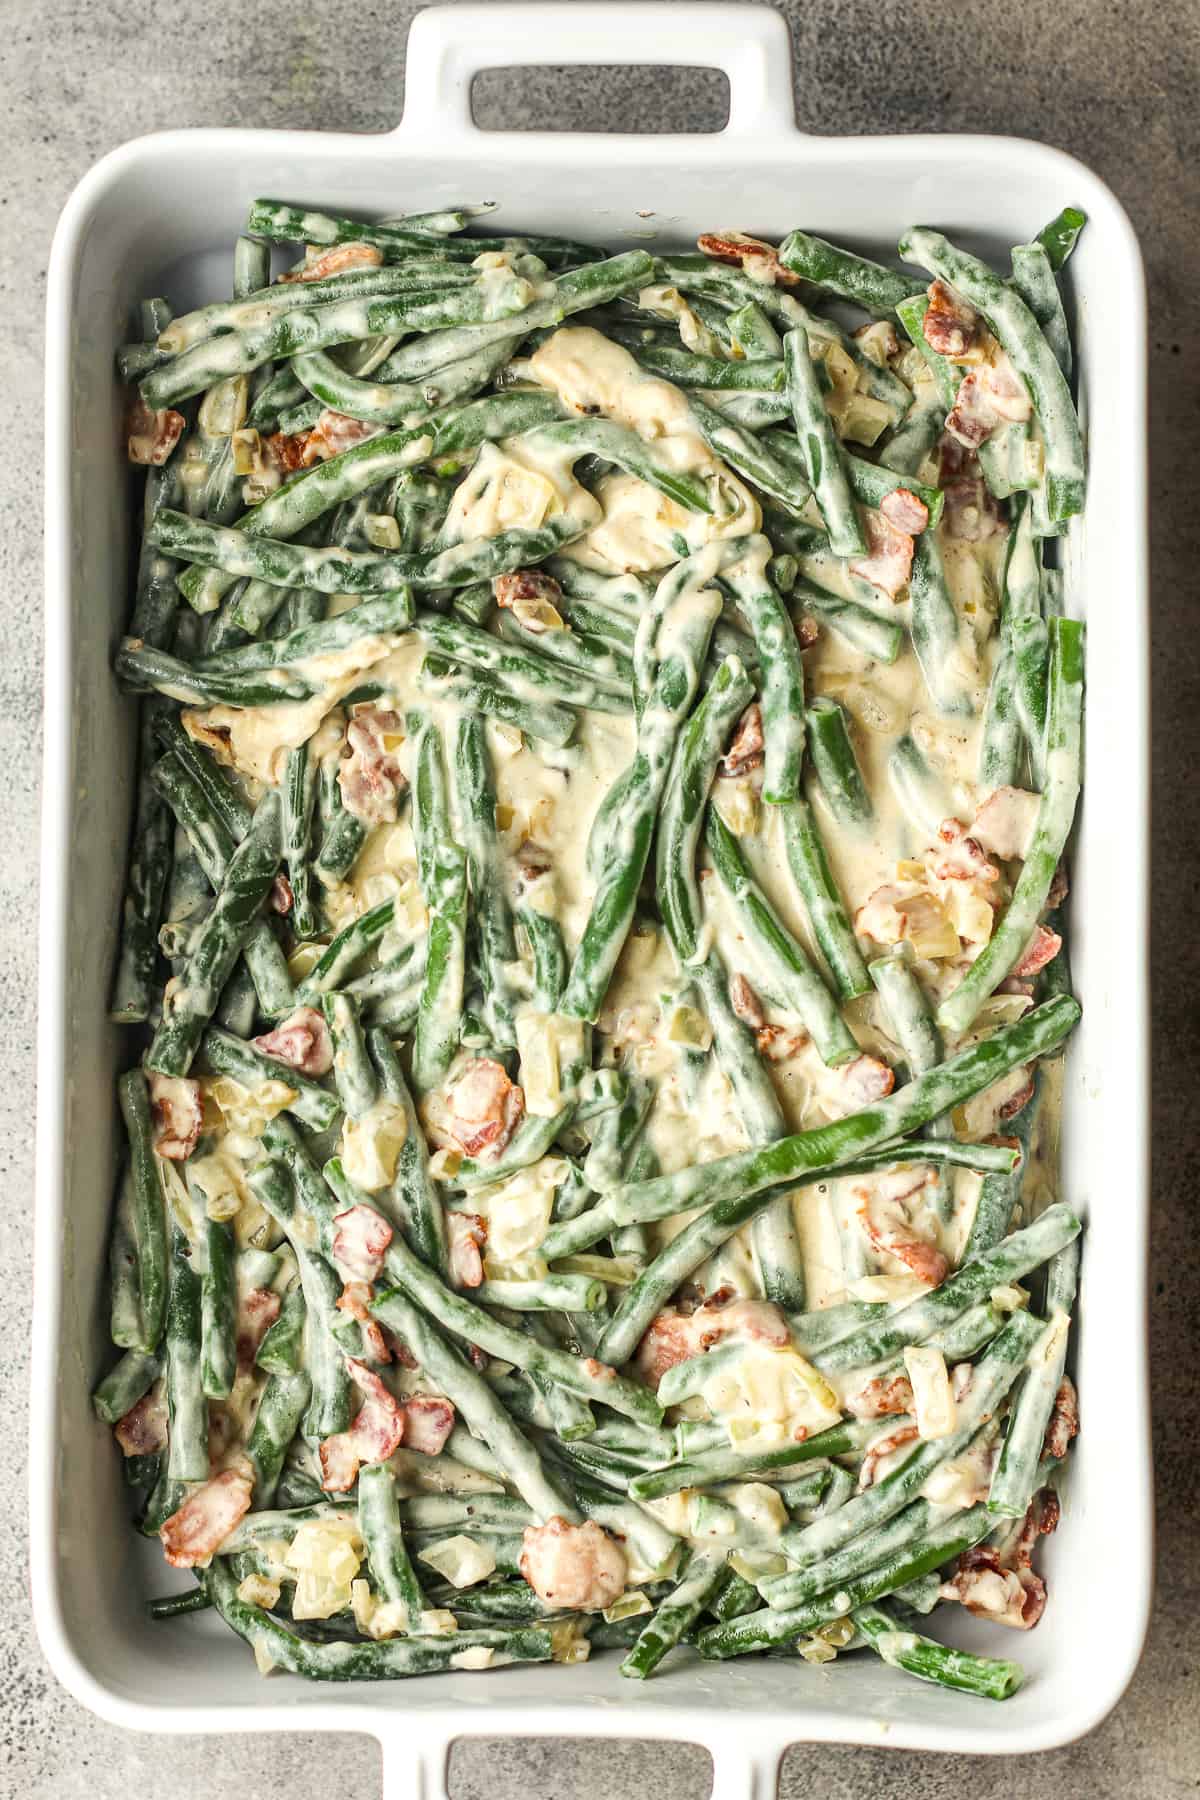 A large casserole dish of fresh green bean casserole before adding the fried onions.